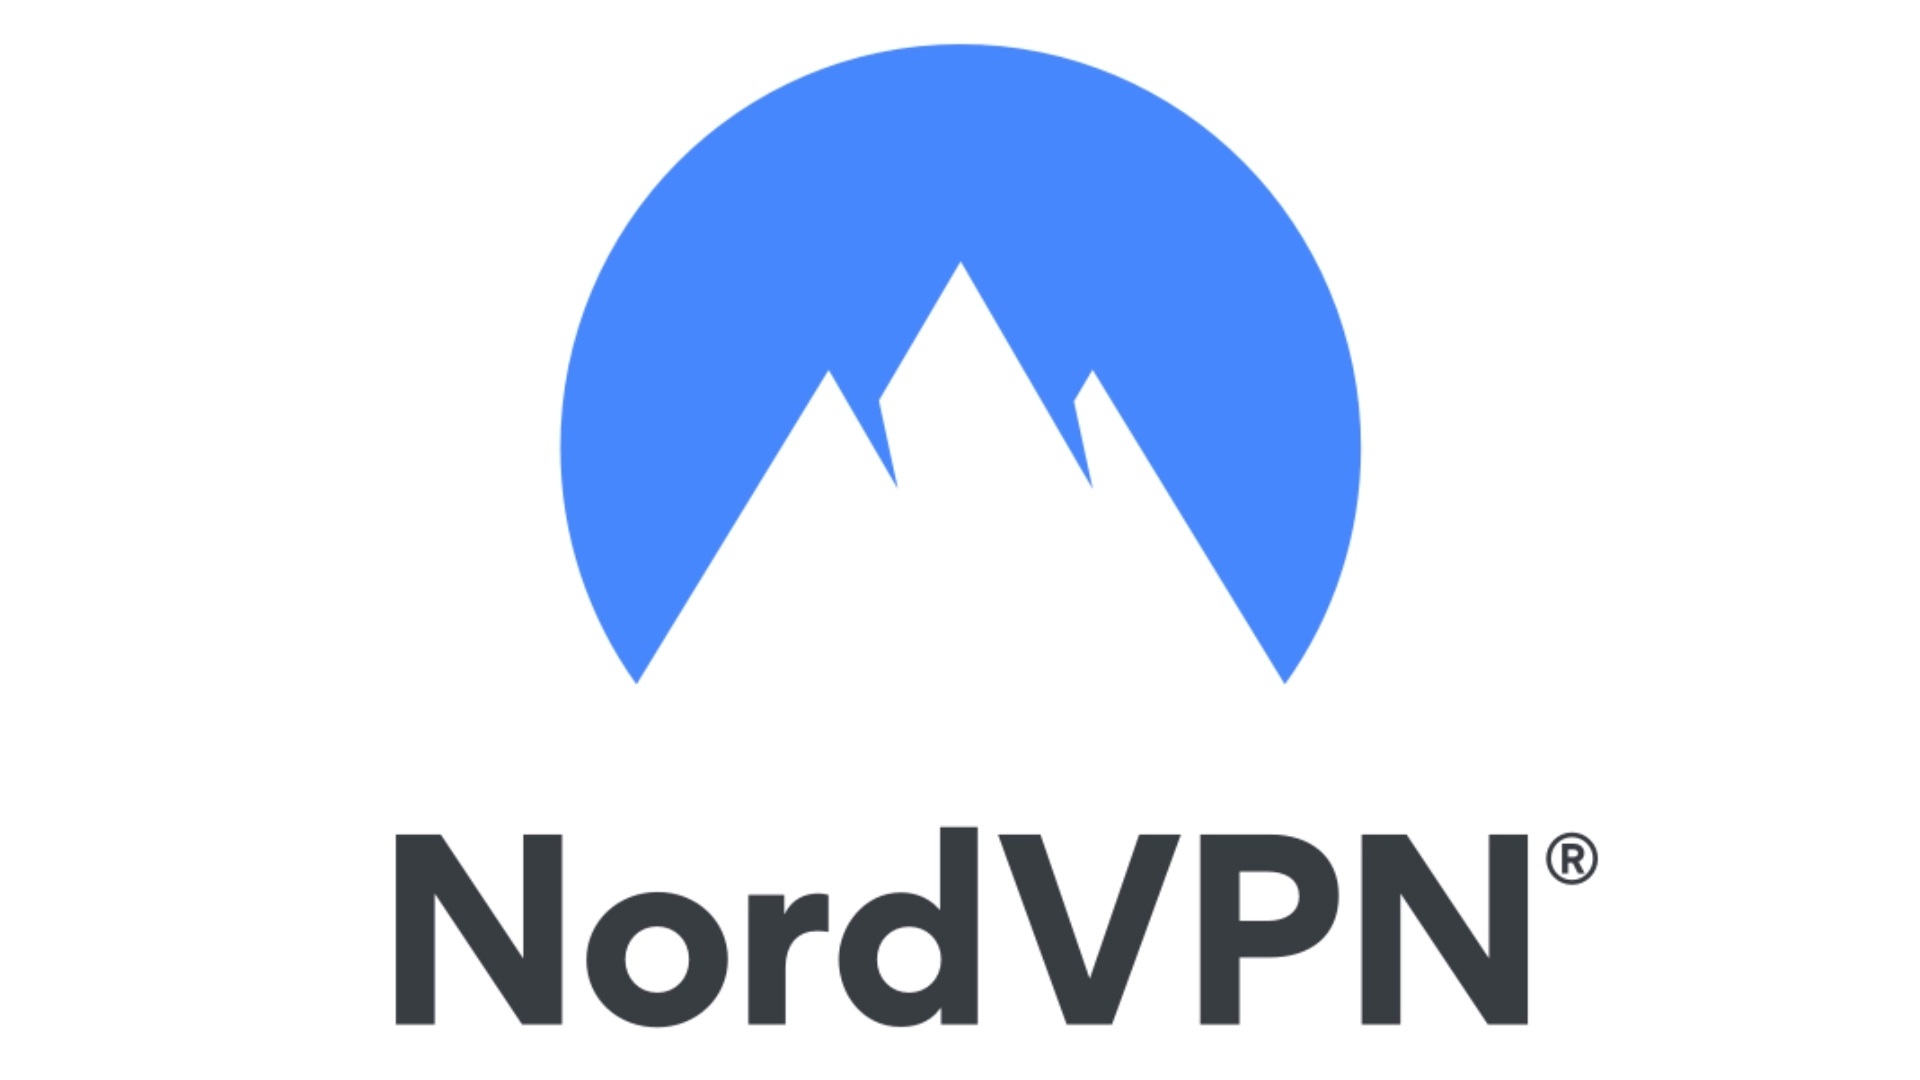 Fastest VPN: NordVPN. Its logo is shown on a white background.